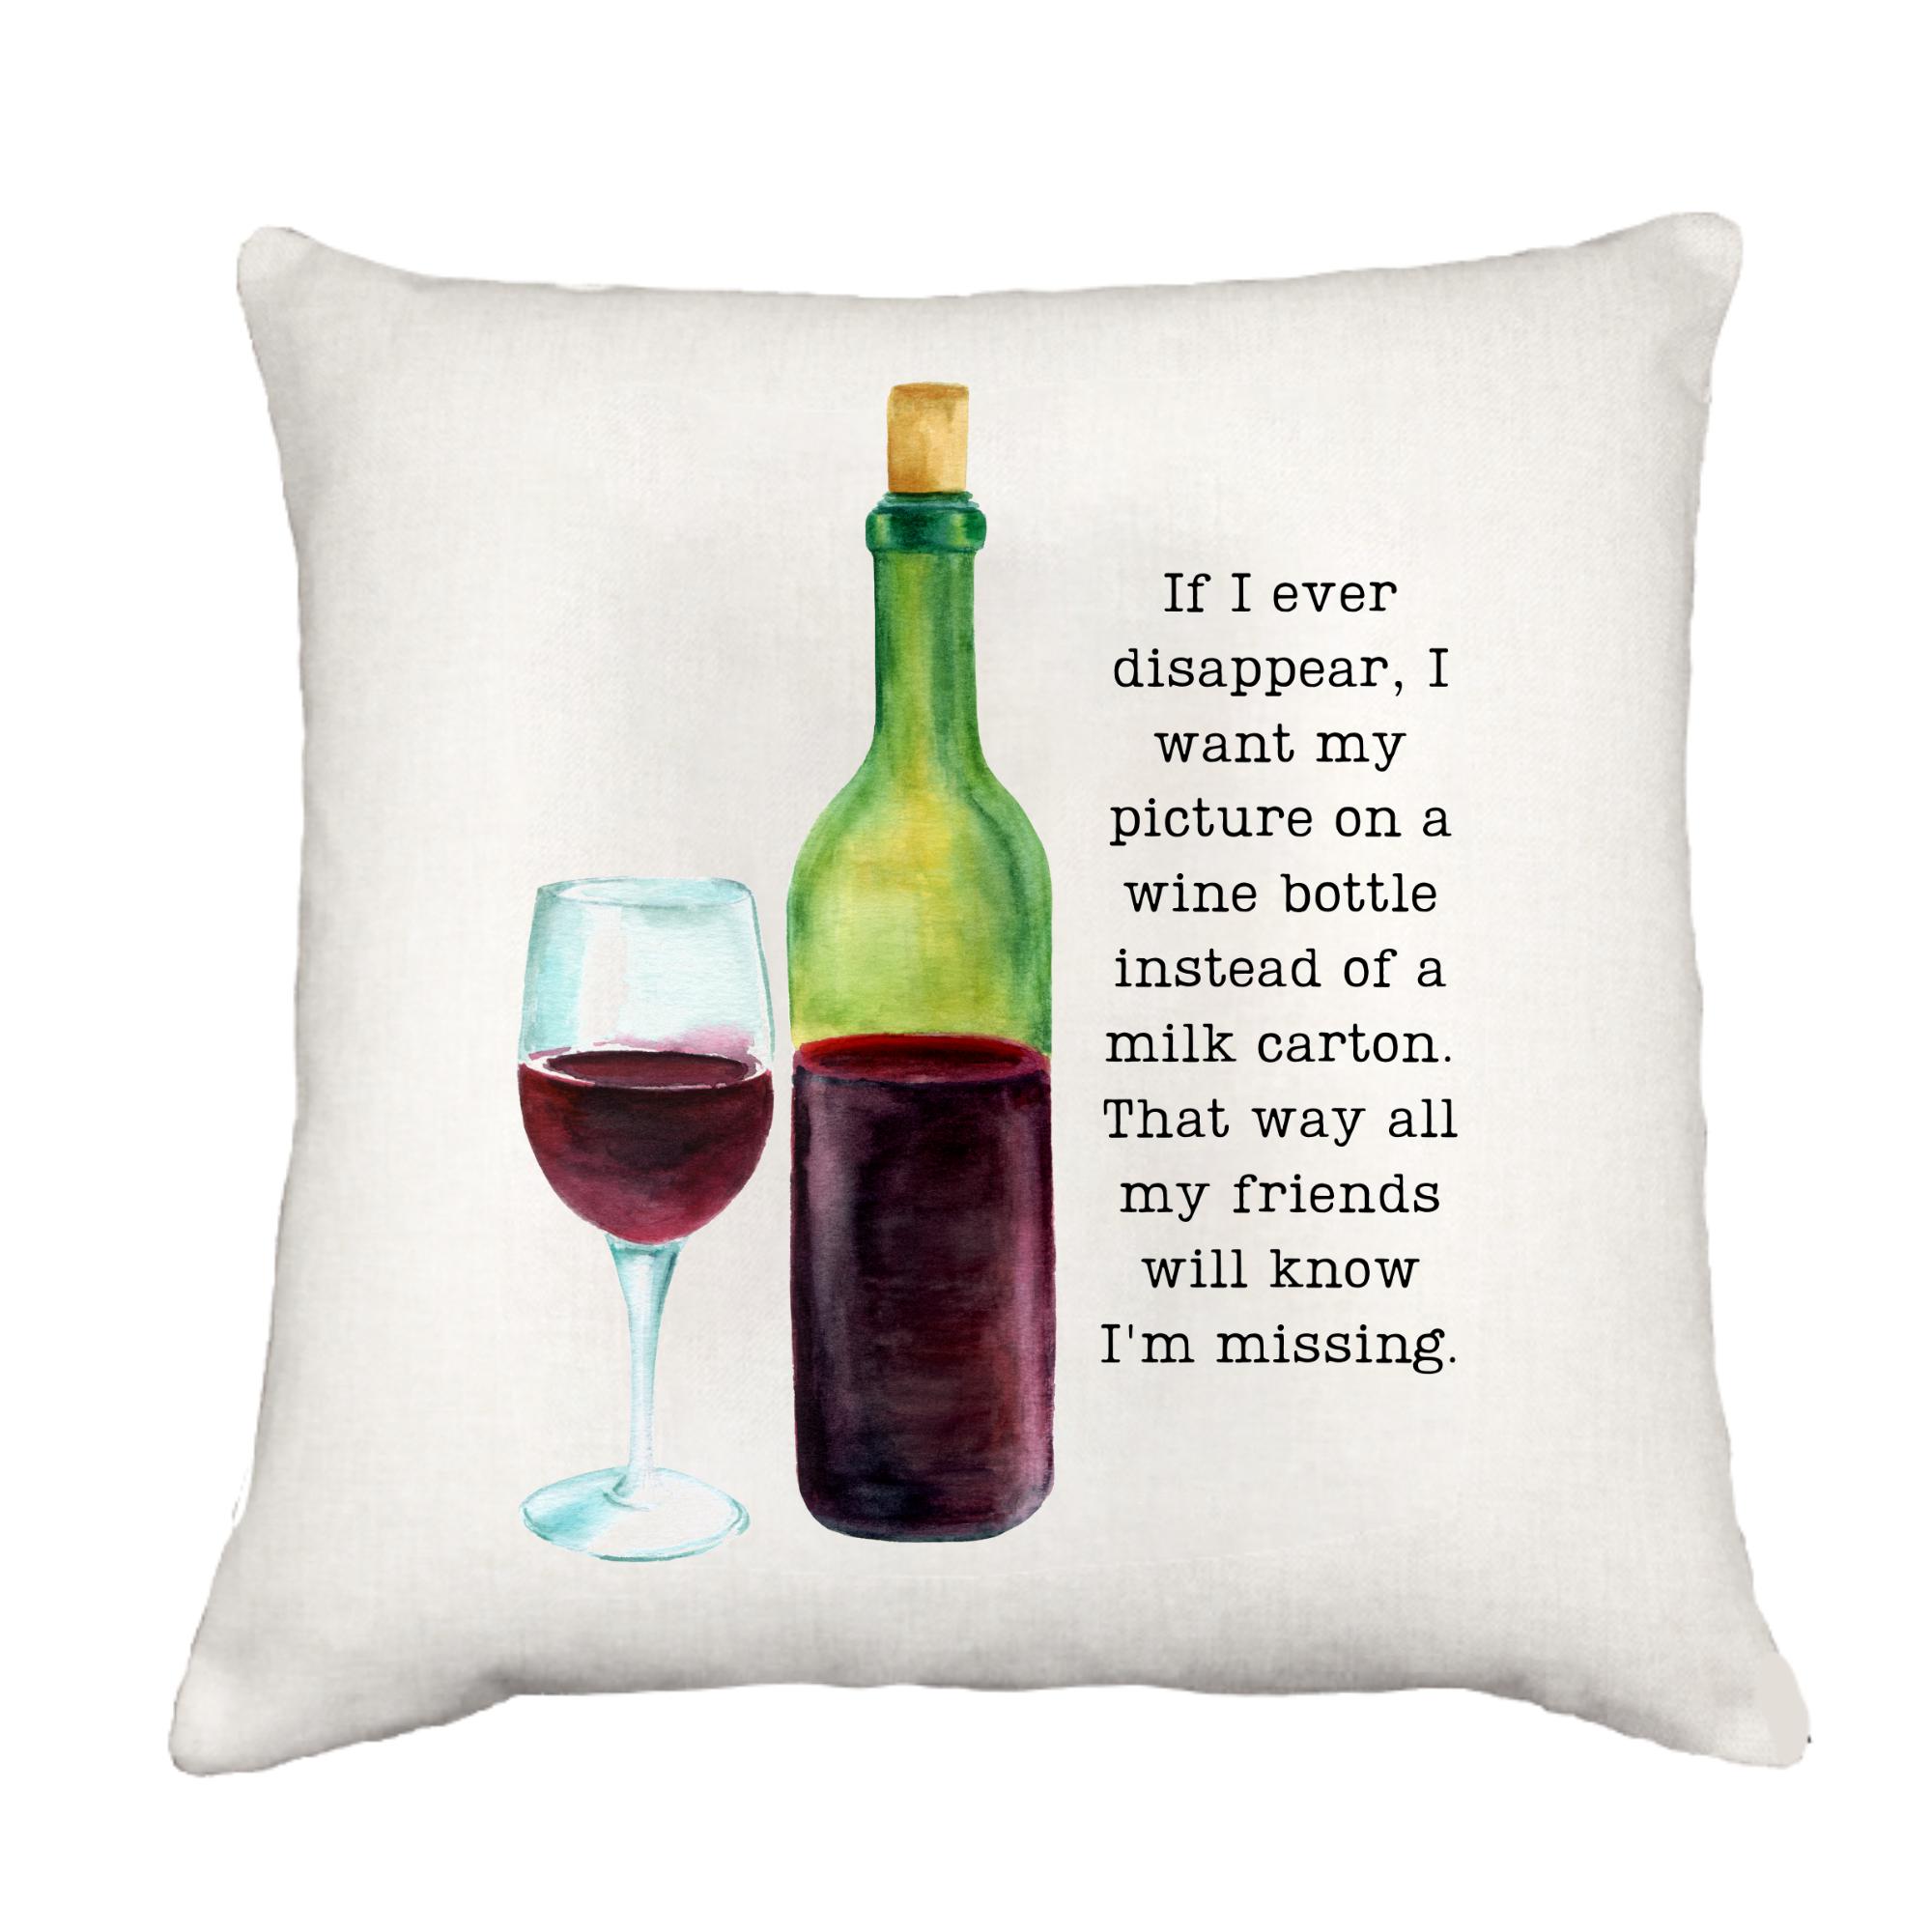 Picture on Wine Bottle Cottage Pillow Throw/Decorative Pillow - Southern Sisters